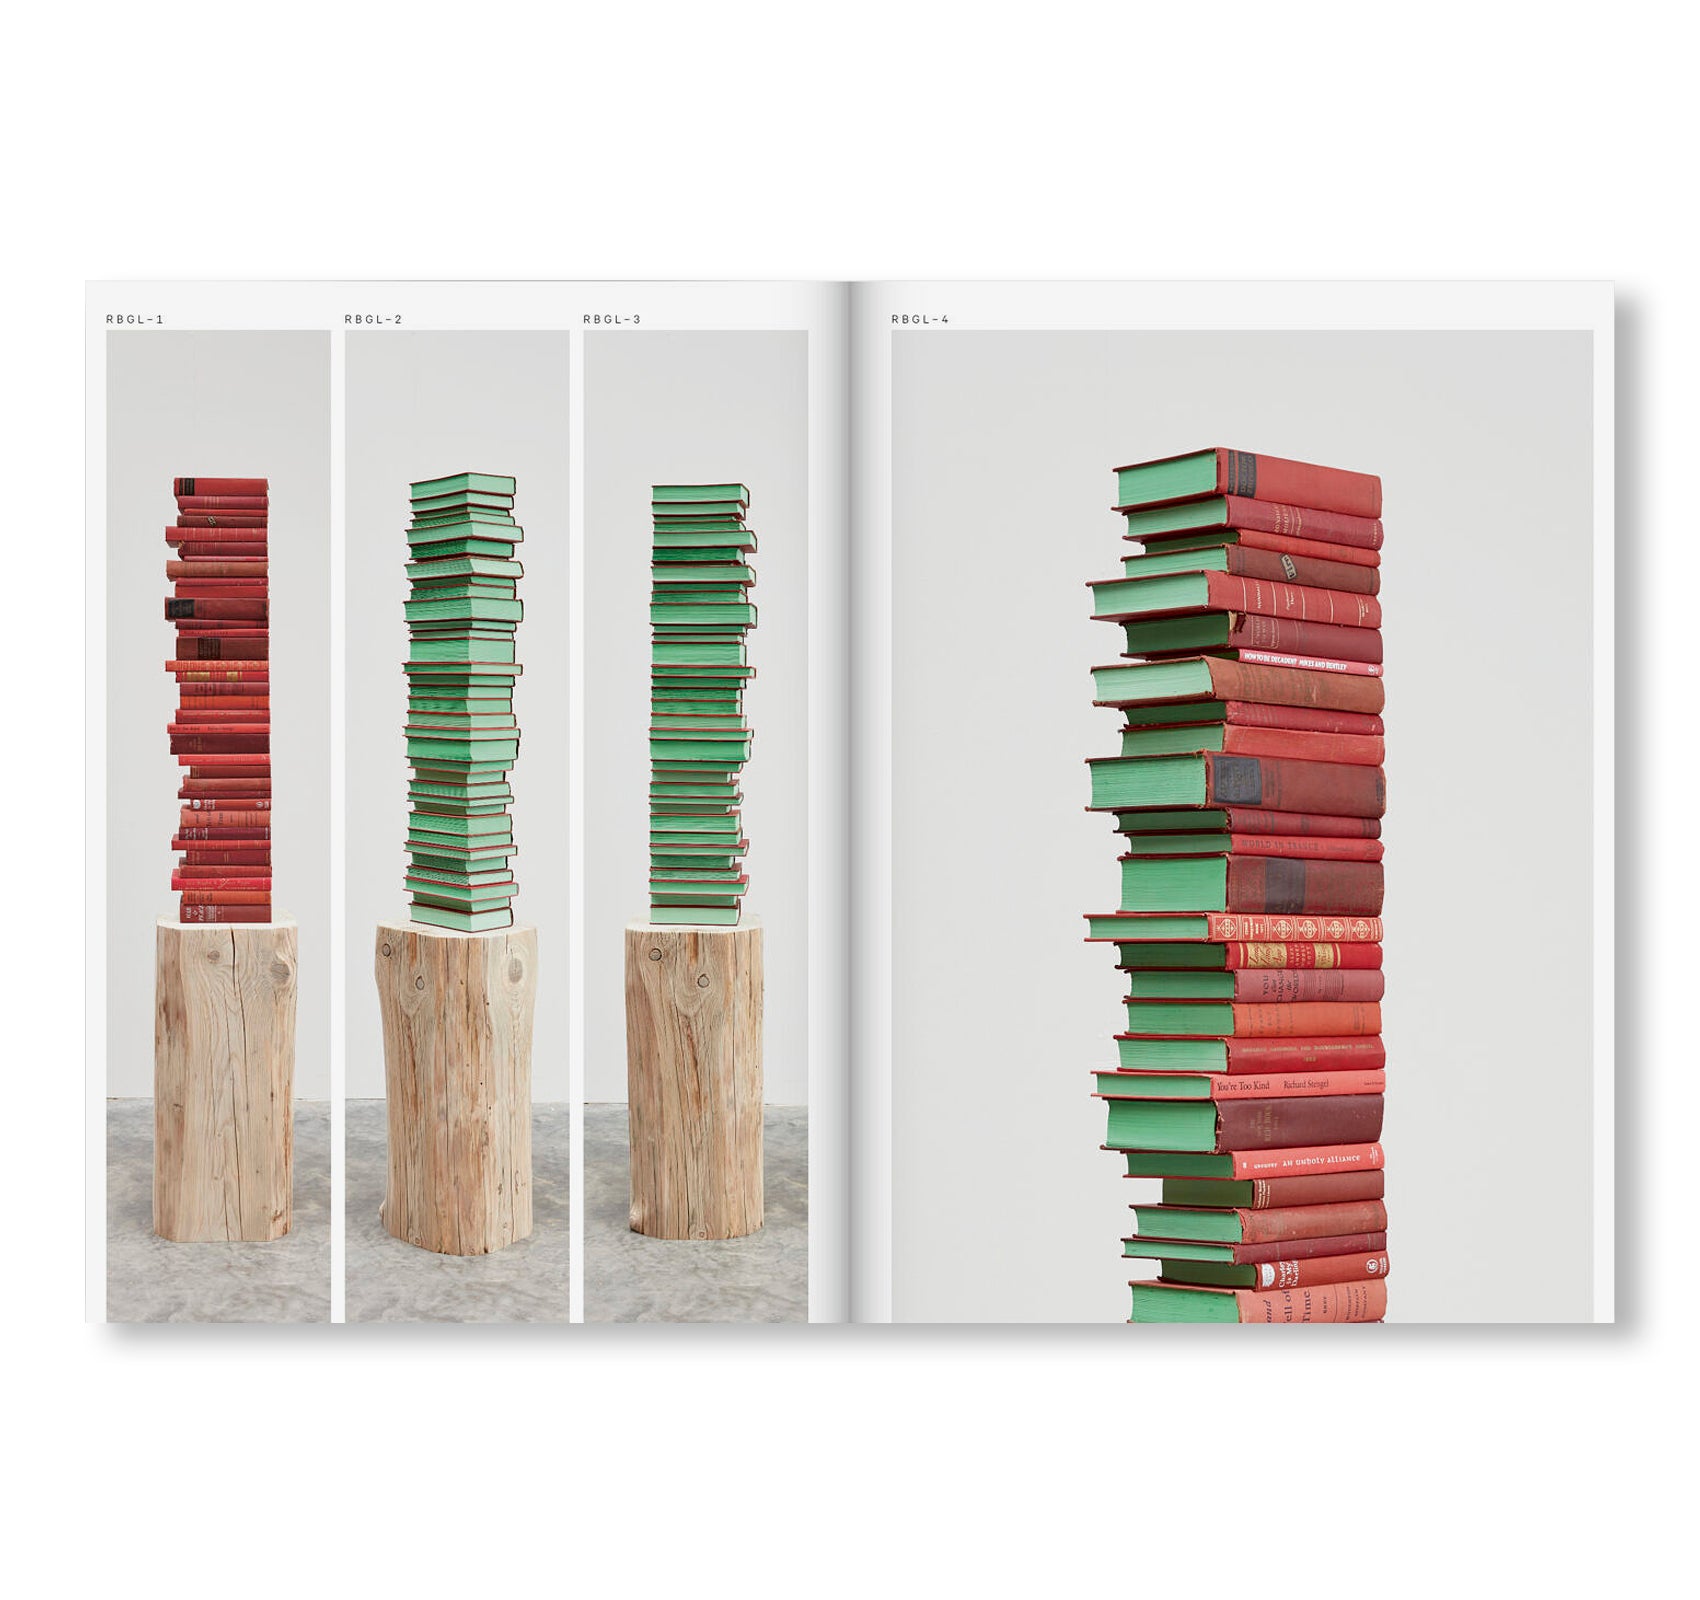 BOOK OF STACKS, STACKS OF BOOKS by Jared Bark